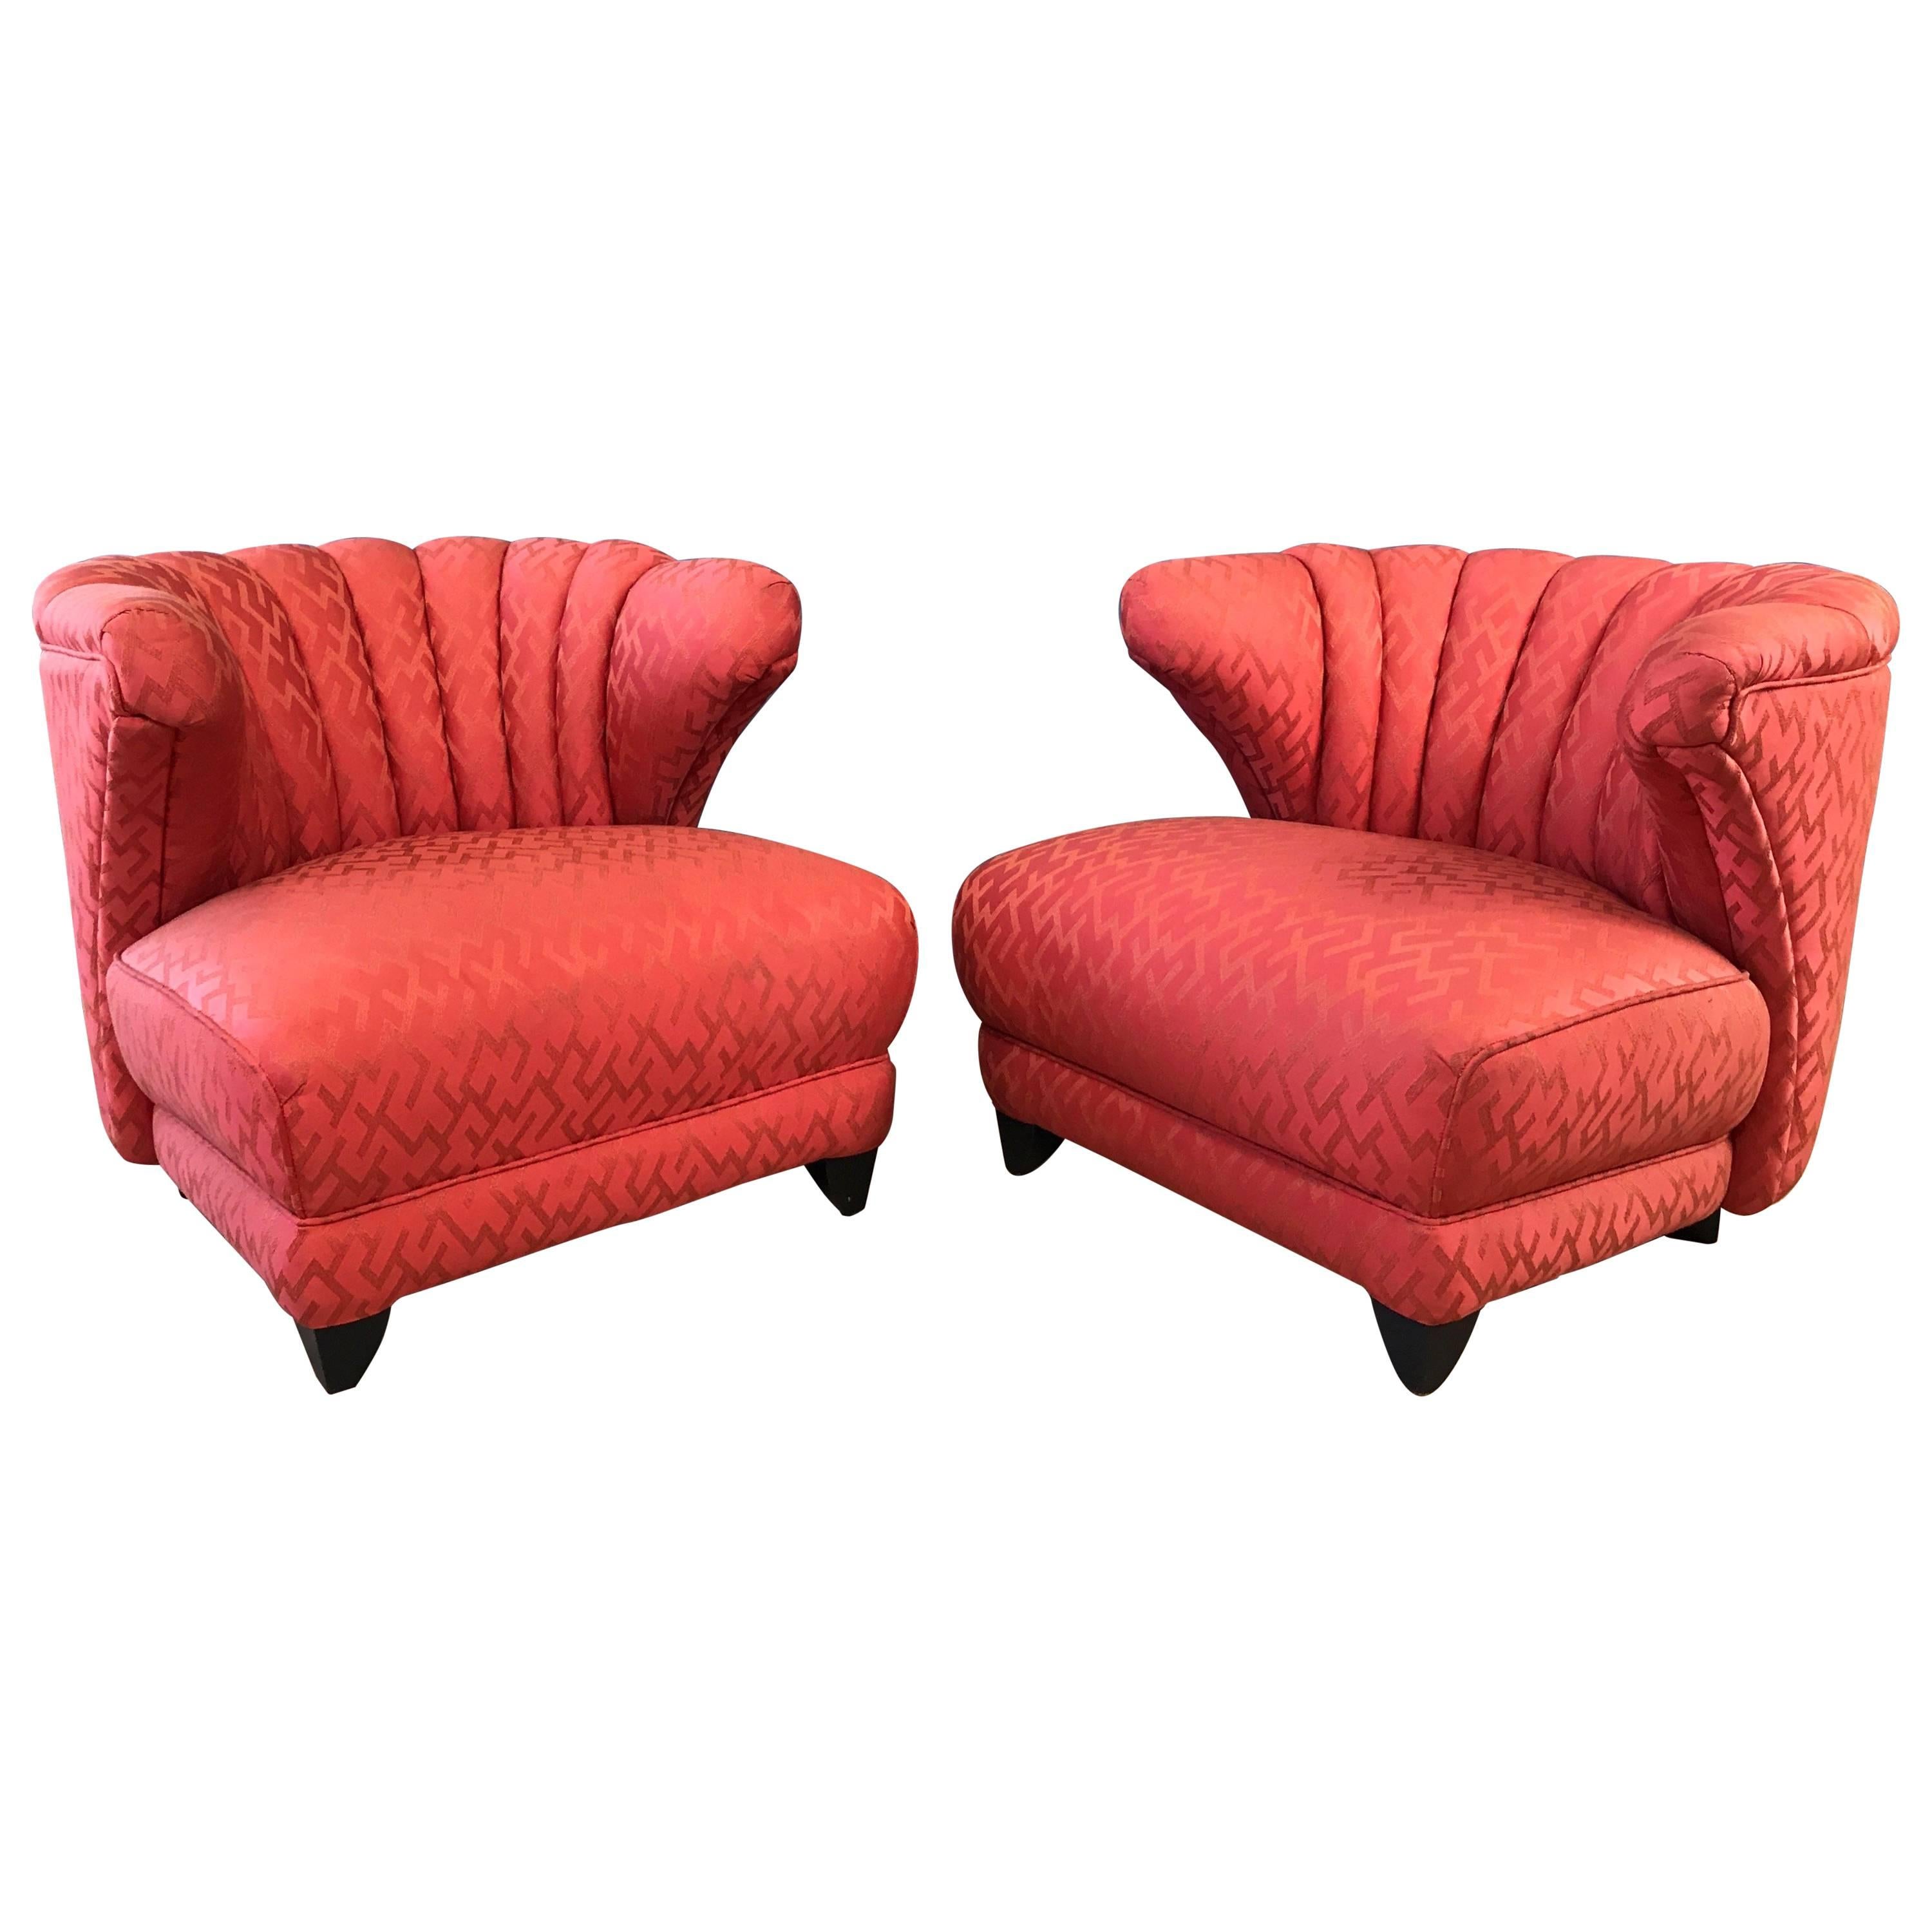 Pair of James Mont Upholstered Lounge Chairs